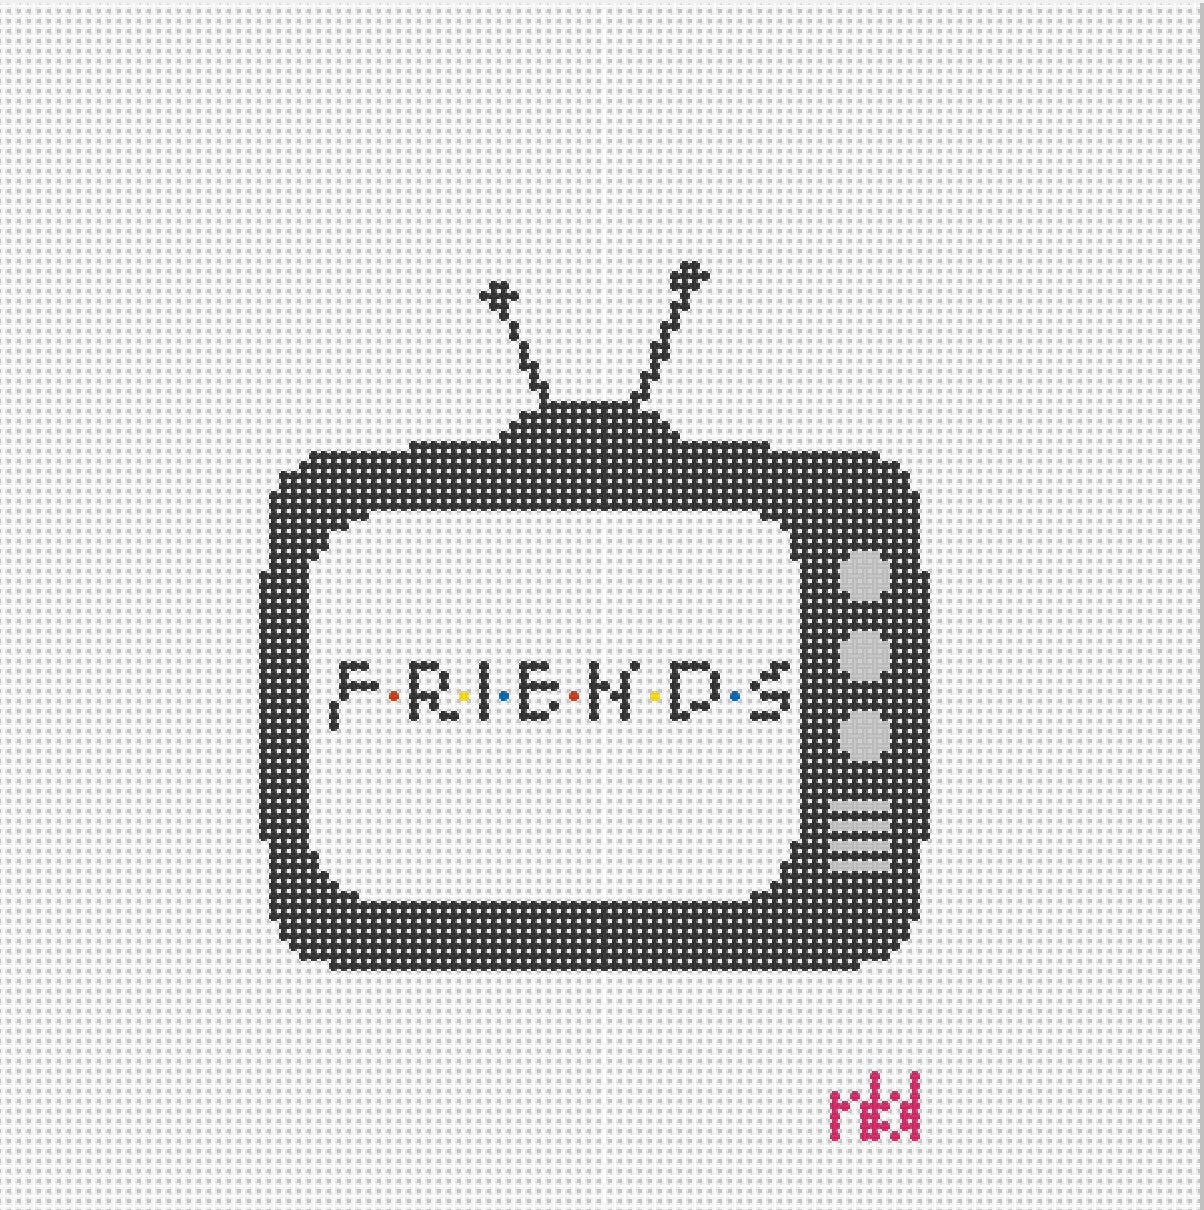 Retro TV Needlepoint Canvas Friends - Needlepoint by Laura